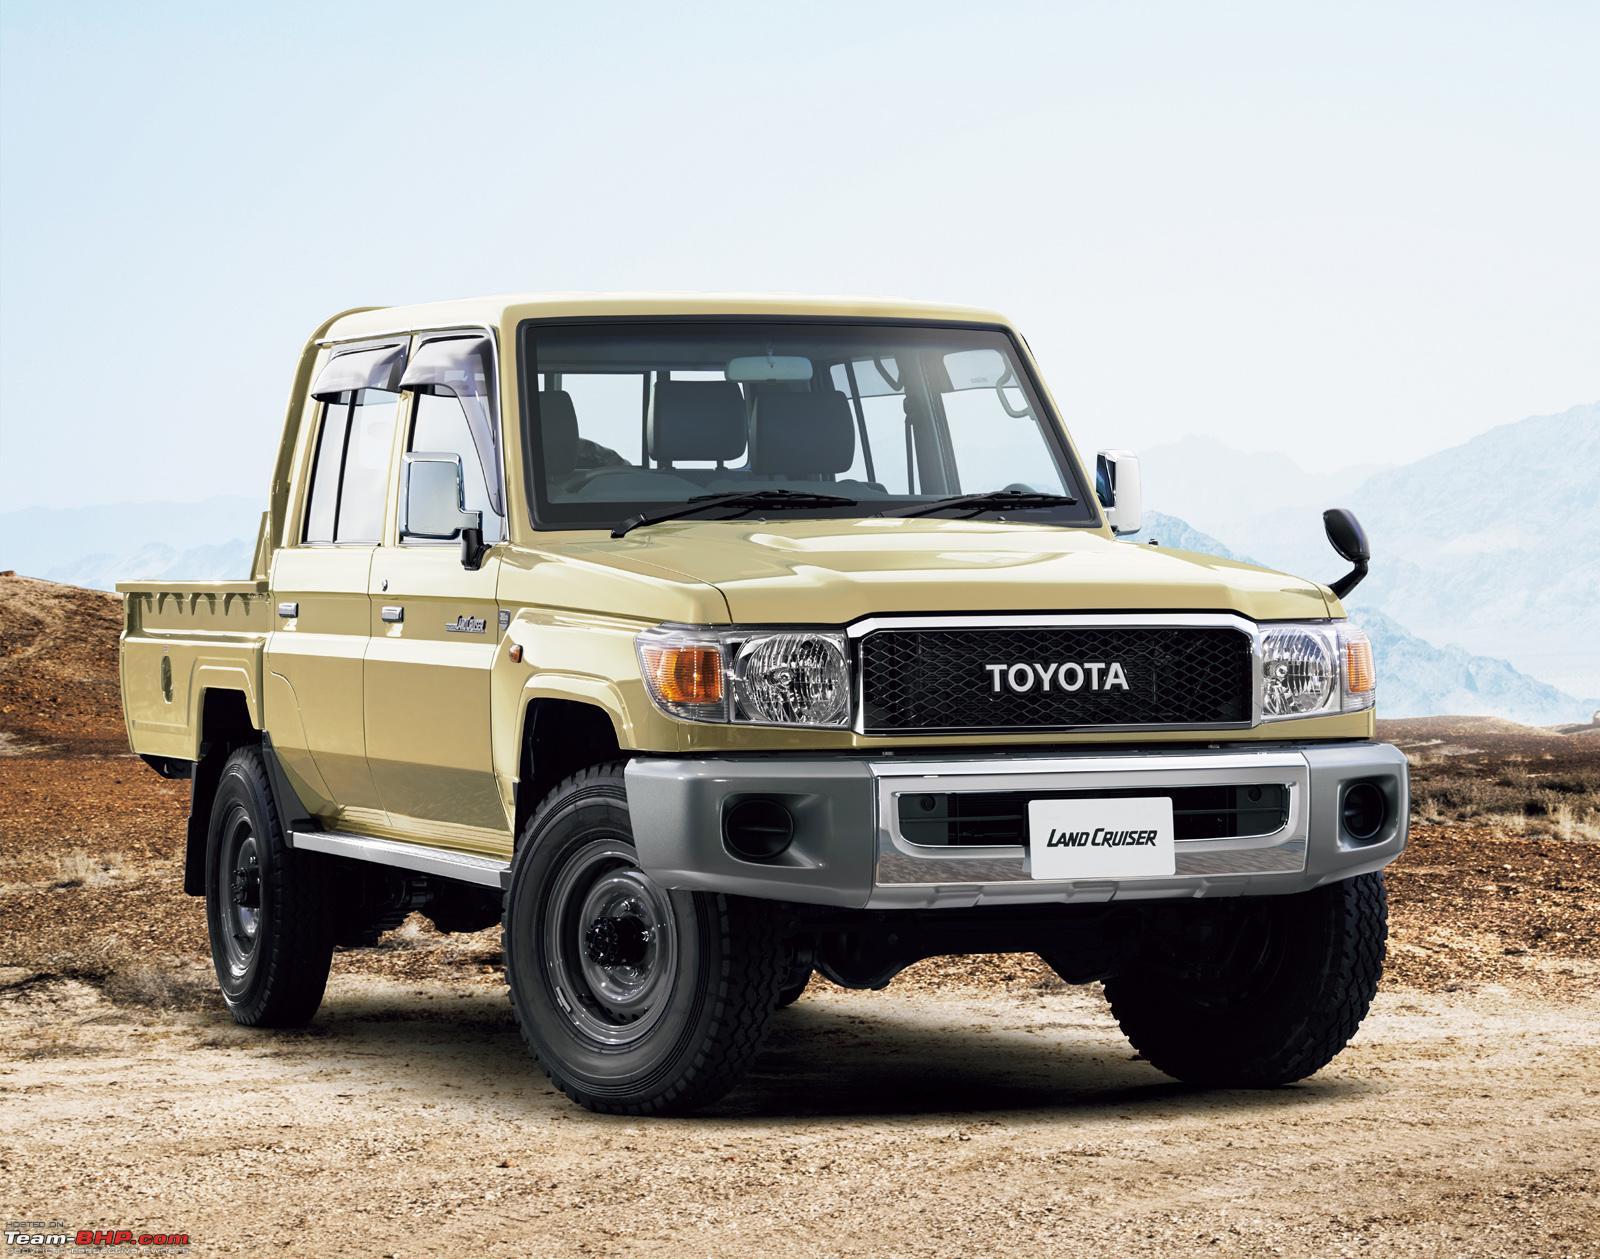 Toyota J70 Land Cruiser relaunched - Team-BHP